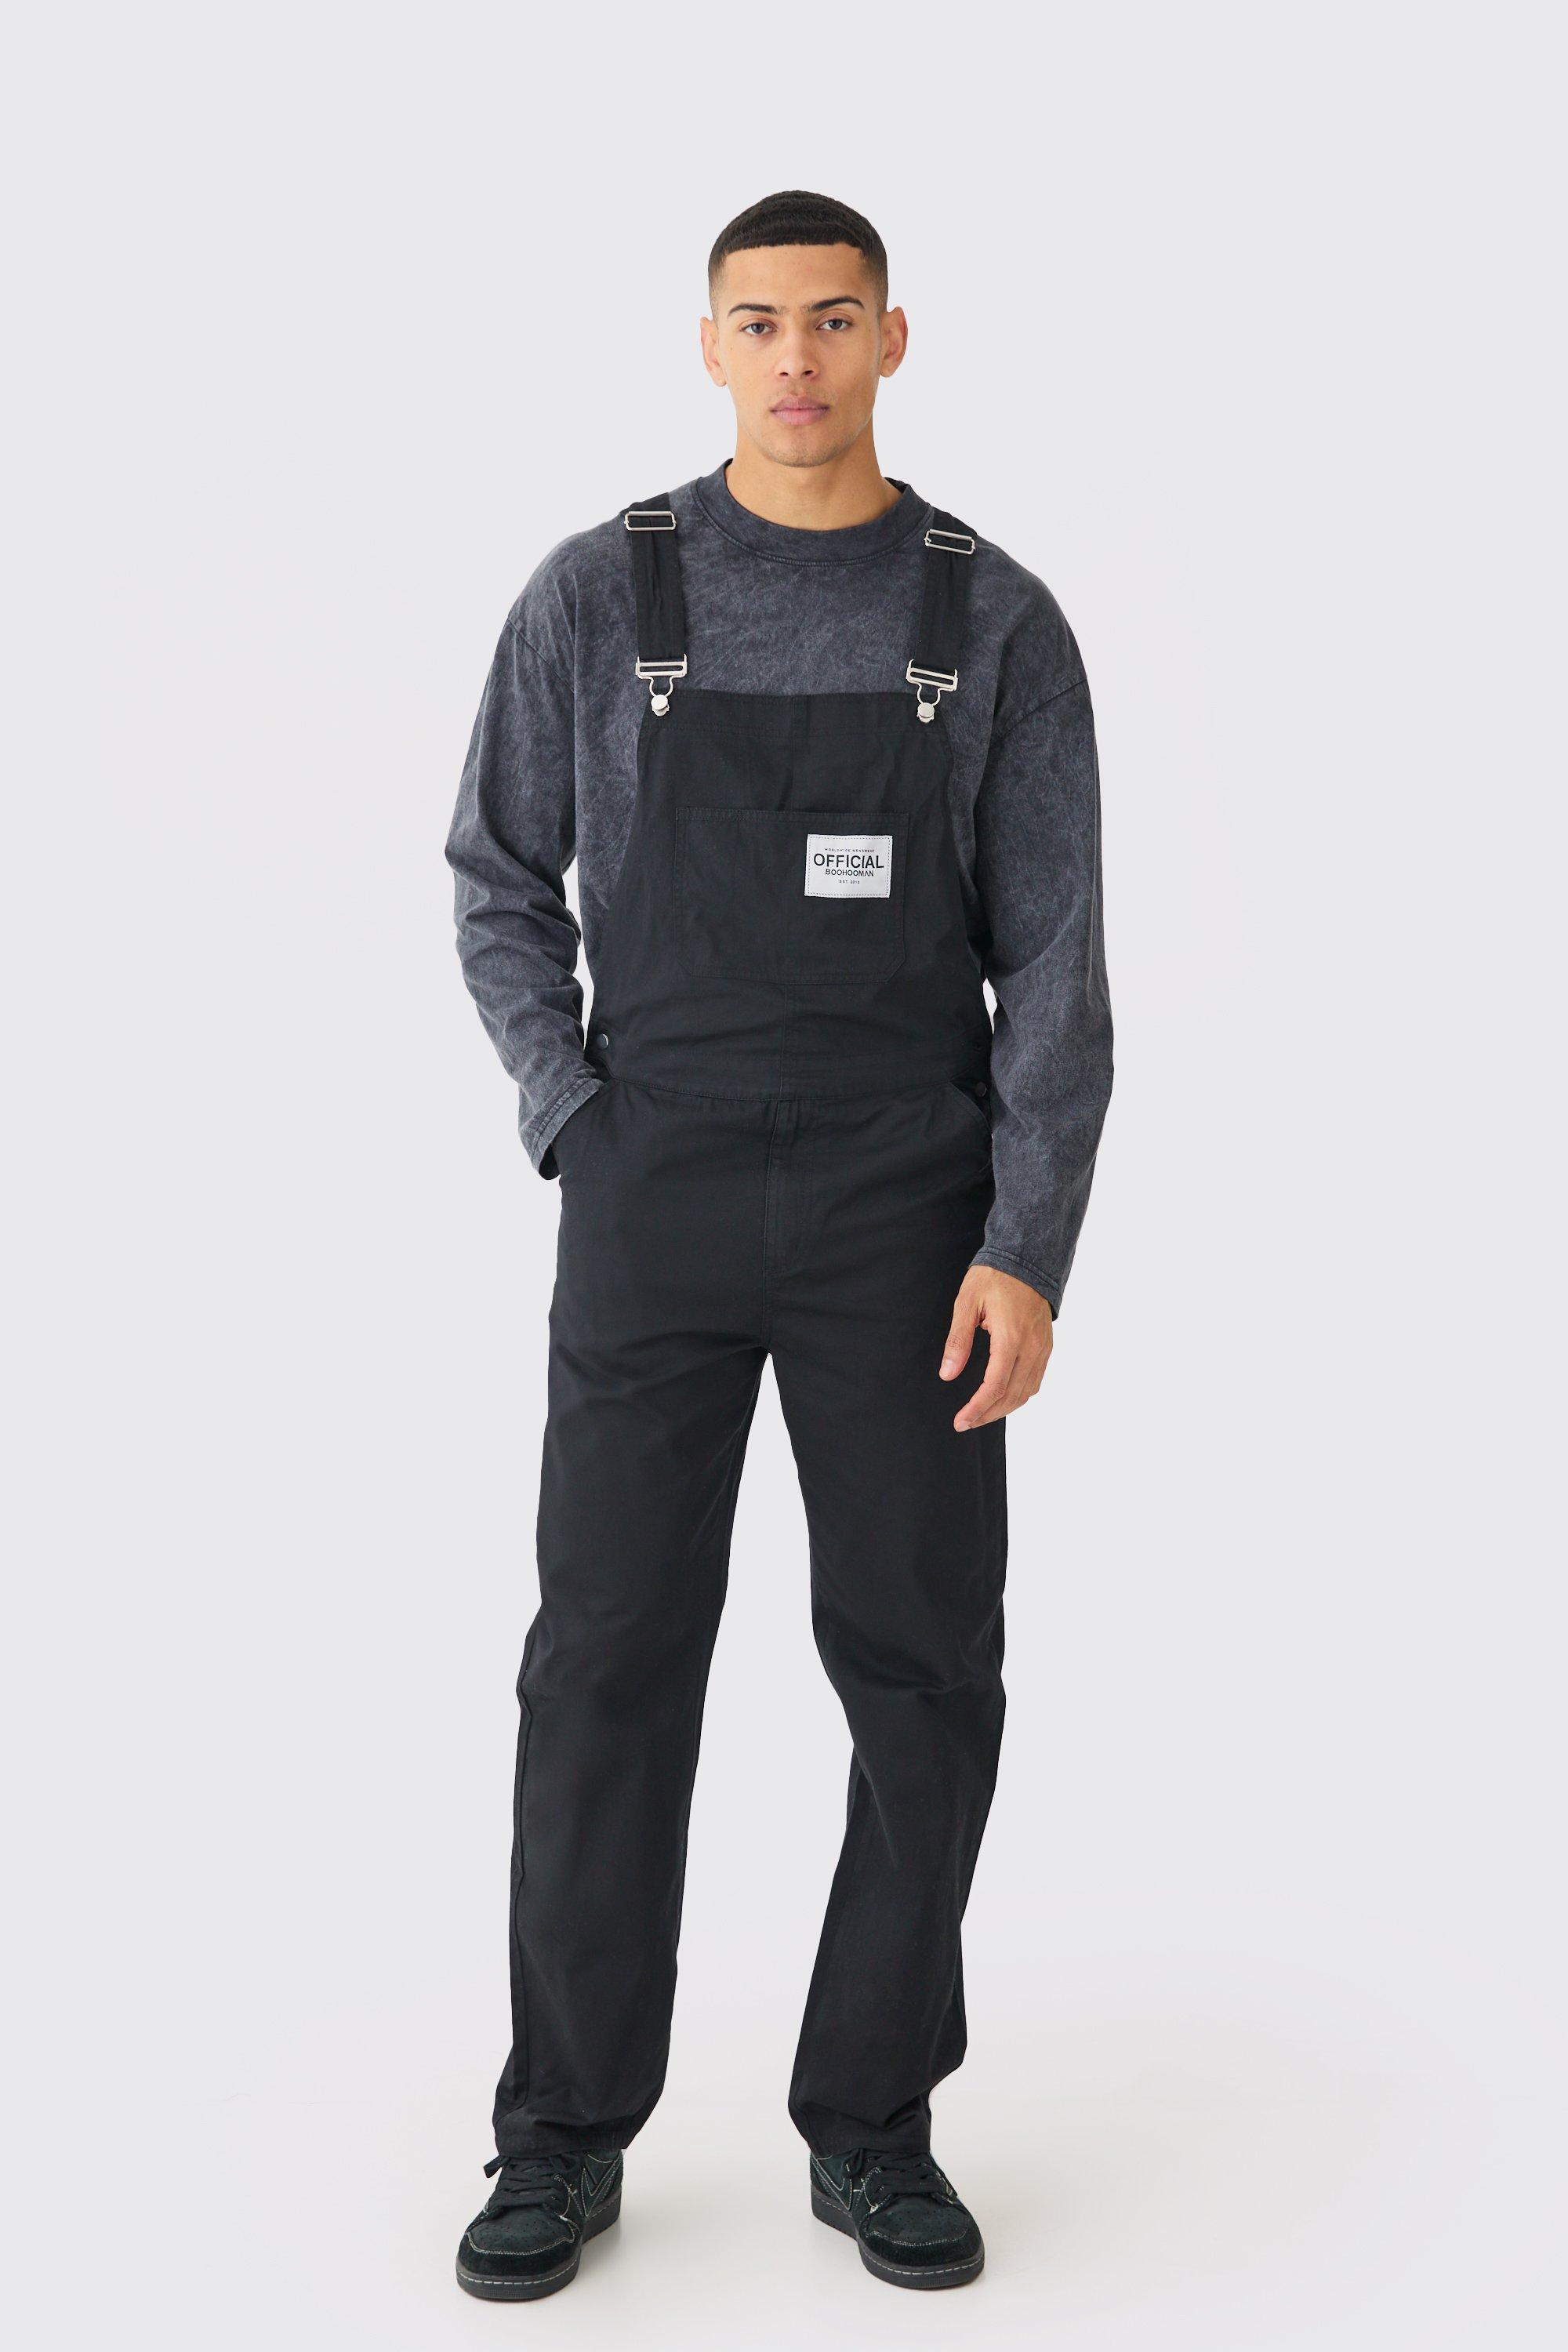 Mens Black Washed Twill Official Relaxed Fit Twill Dungarees, Black